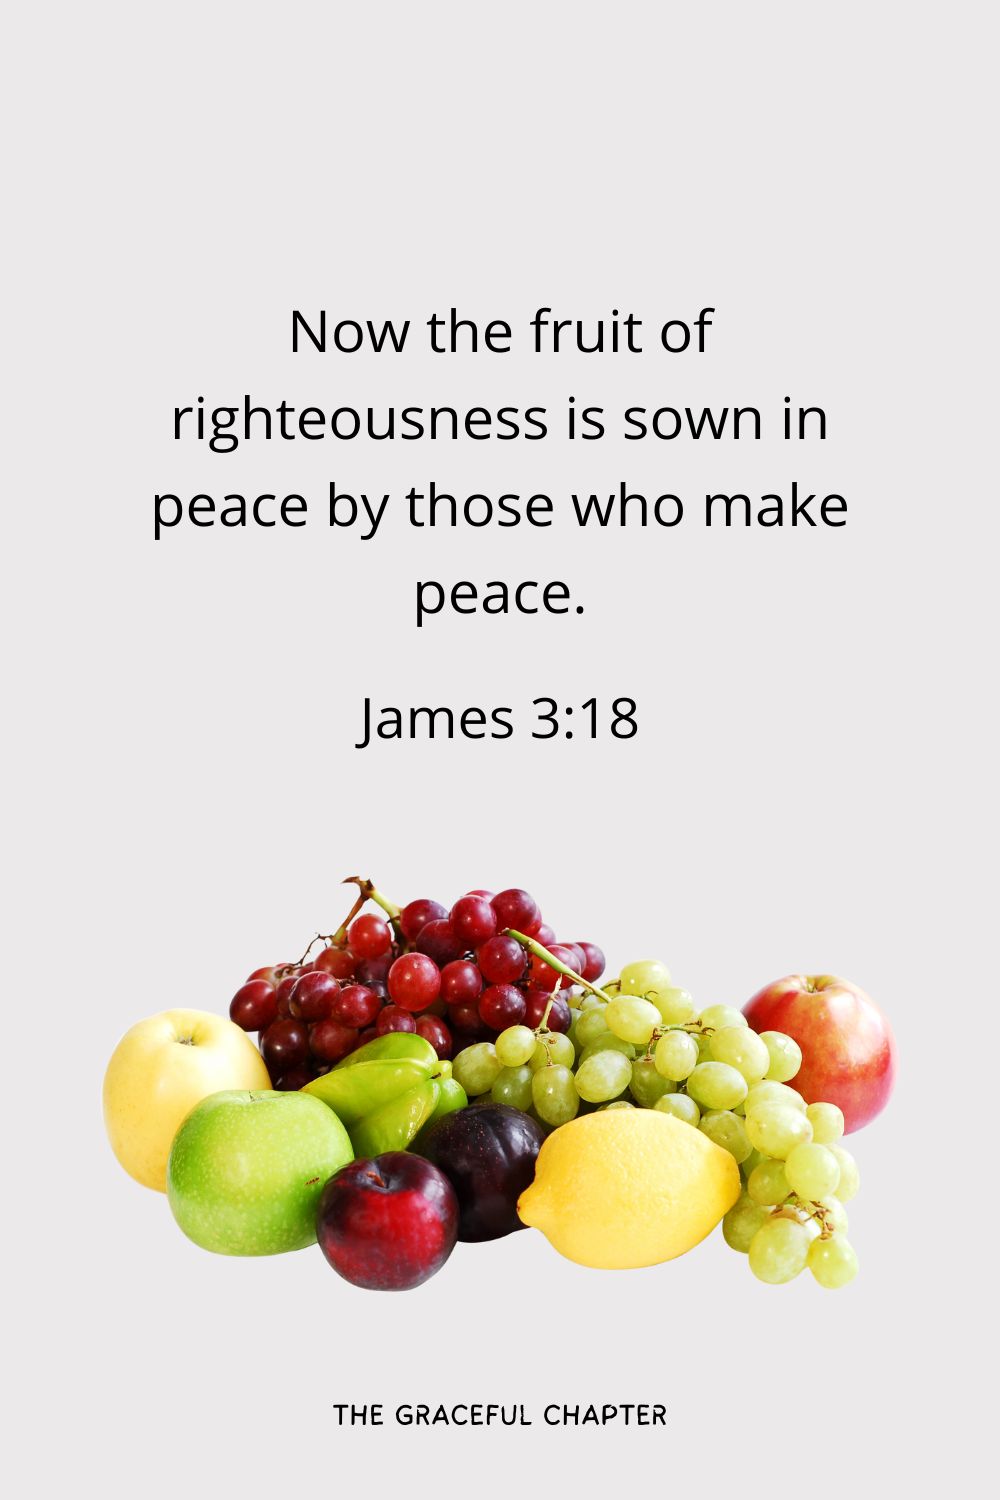 Now the fruit of righteousness is sown in peace by those who make peace.